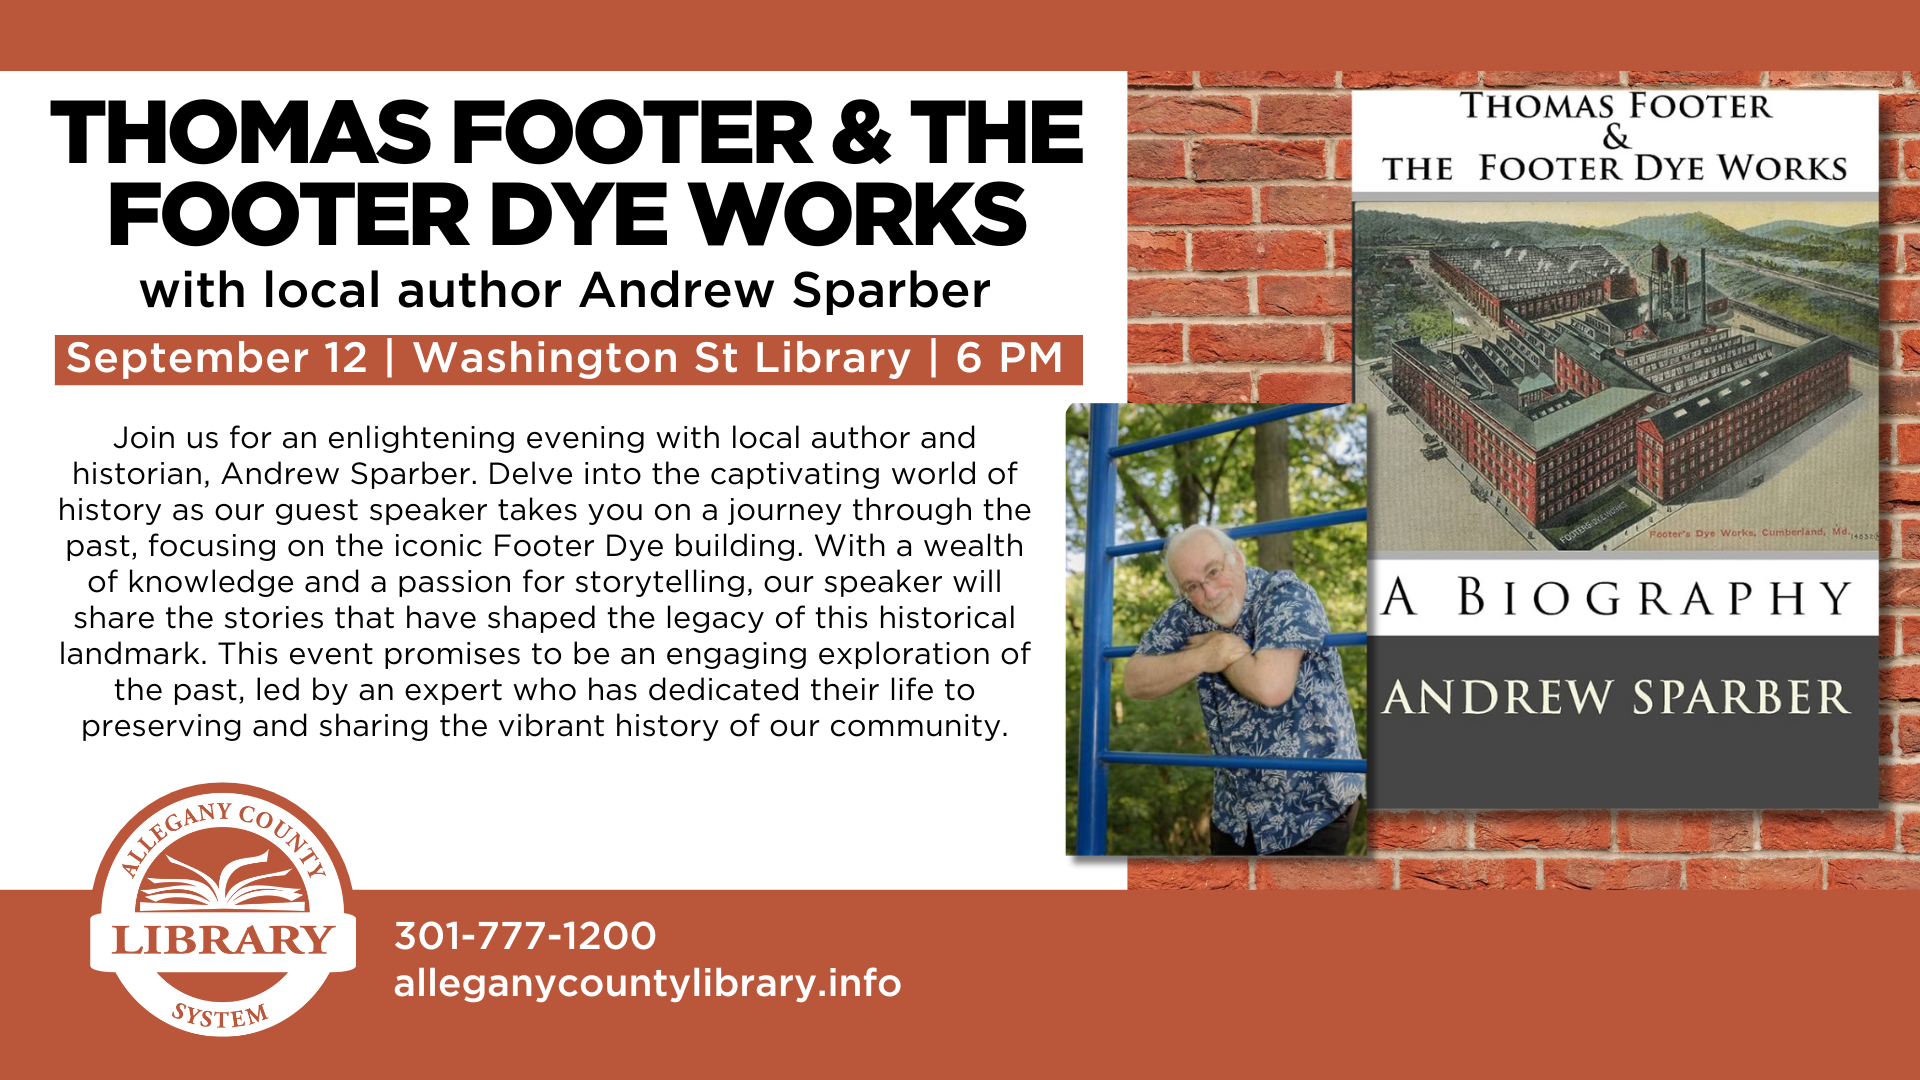 Thomas footer & The Footer dye Works event details with a picture of the book by the same title and picture of the male author, Andrew Sparber